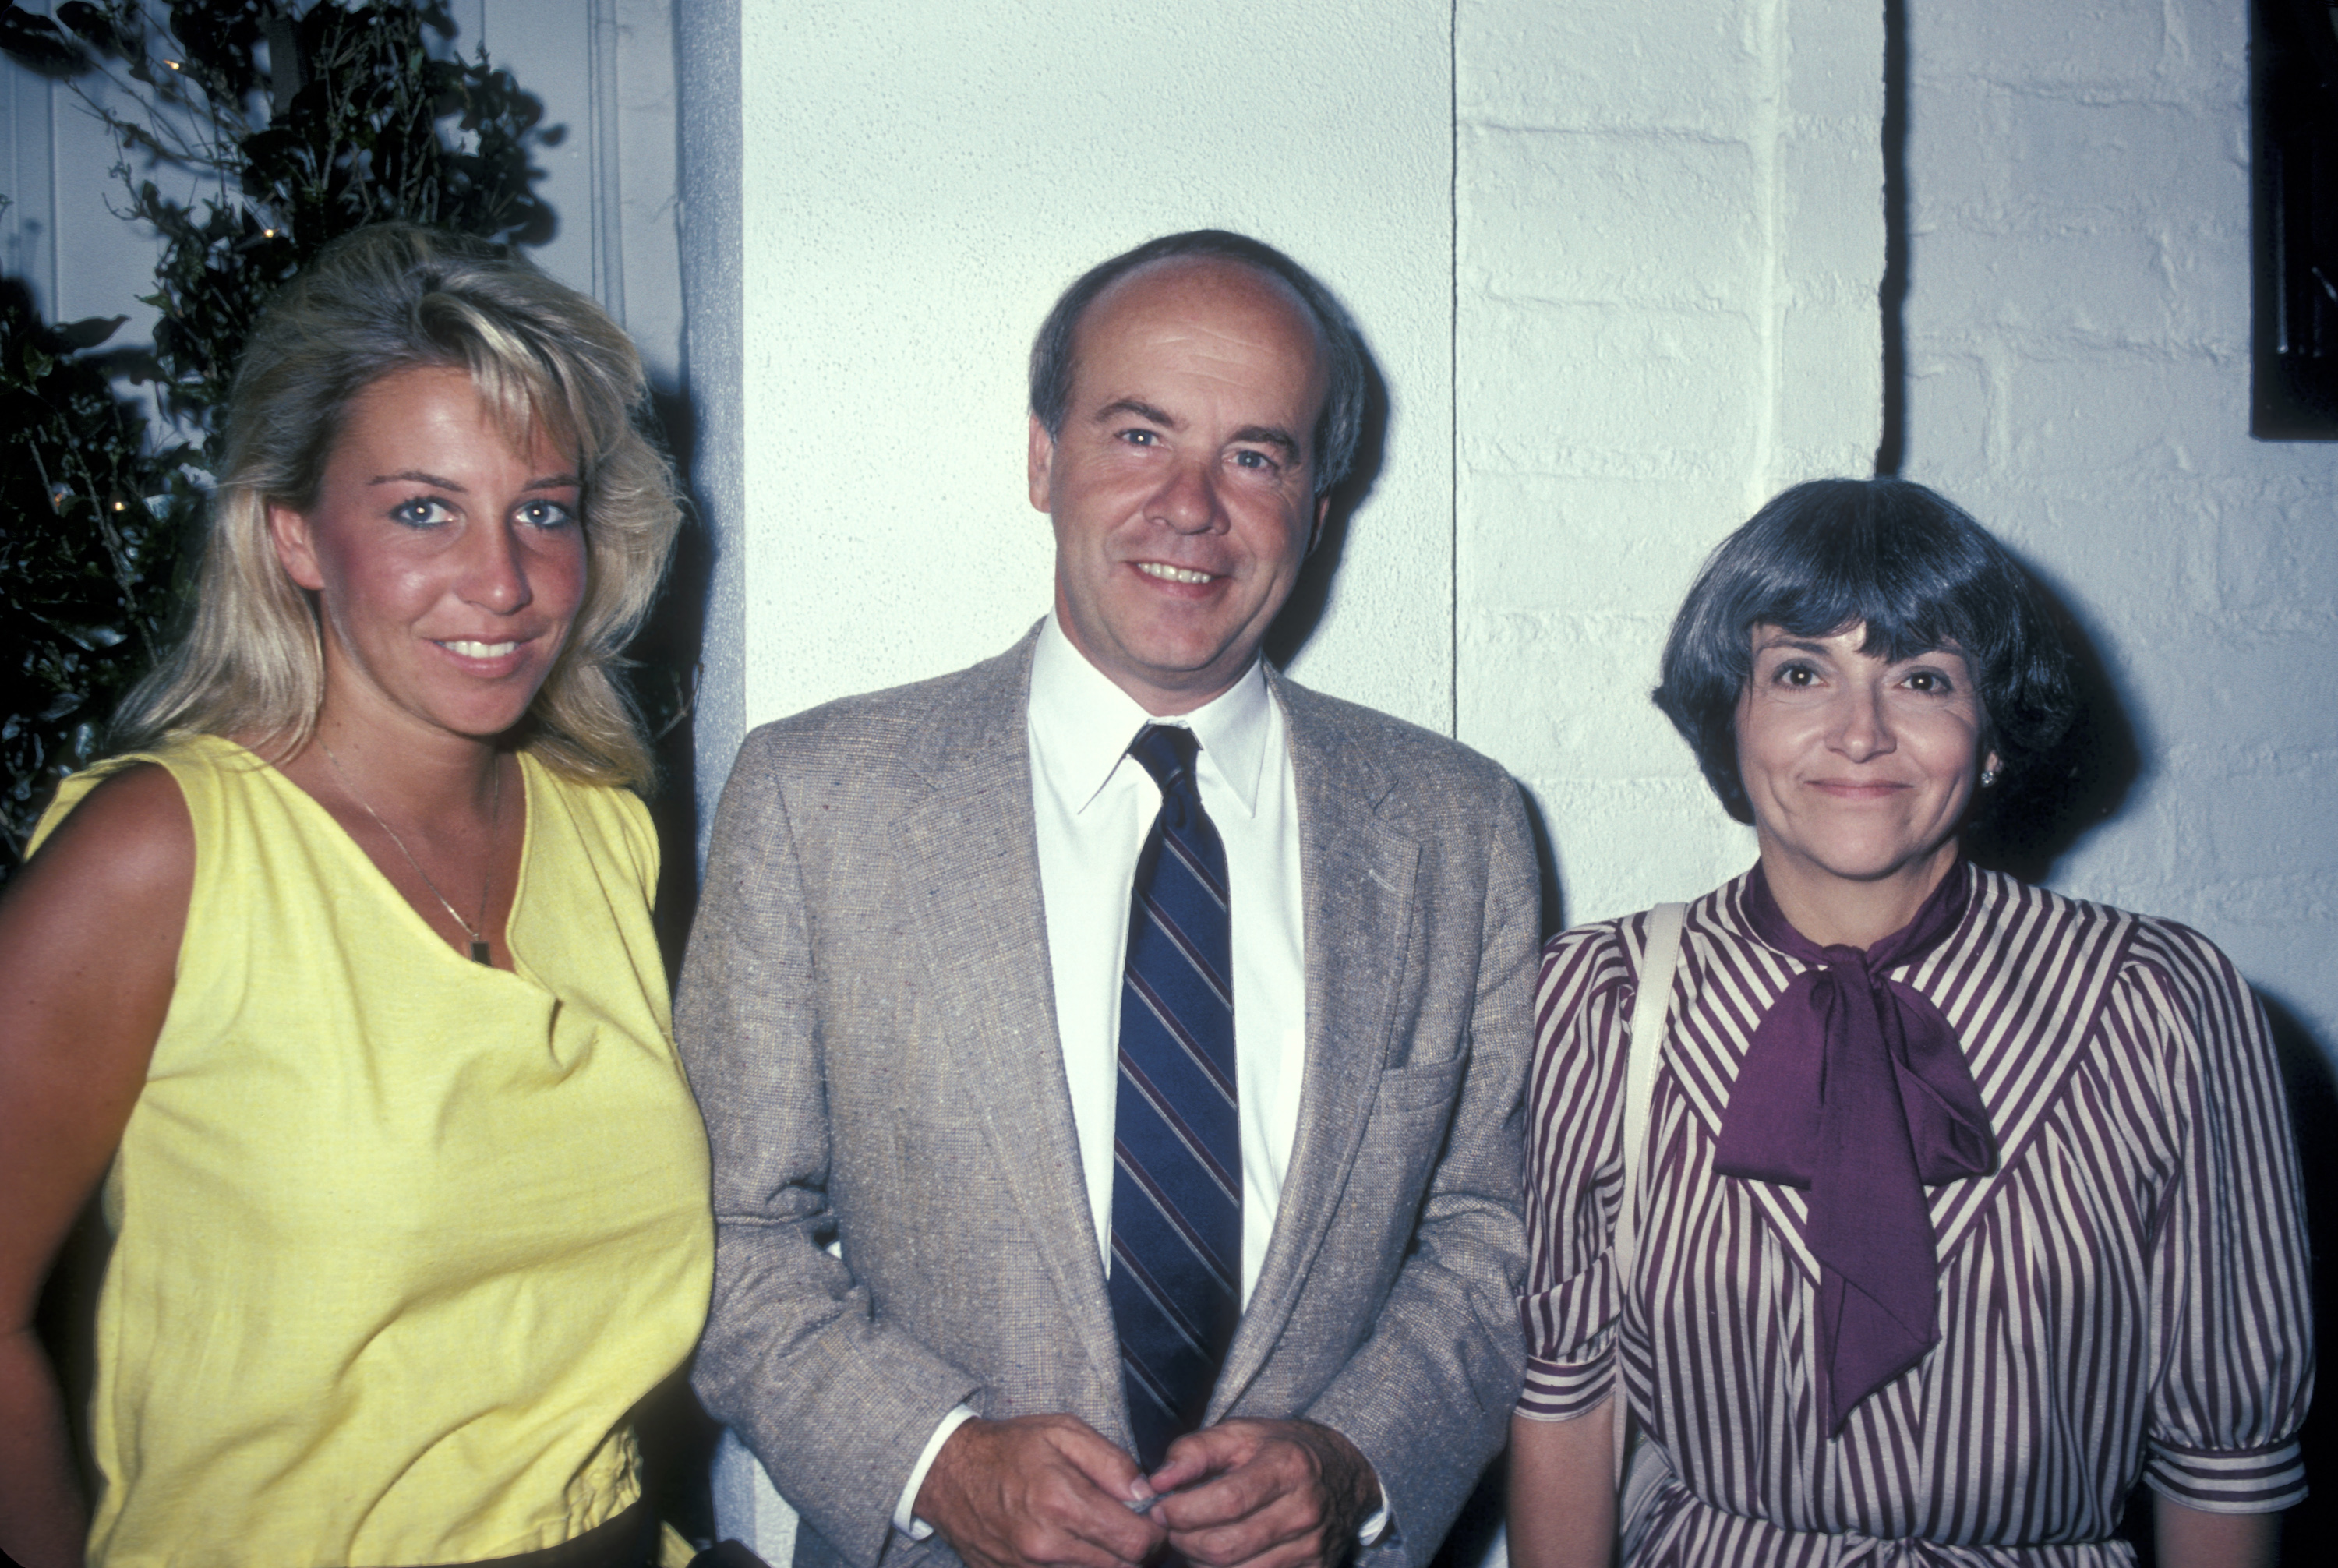 Kelly Conway with her father Tim Conway, and his wife Charlene being photographed on August 9, 1983 at Chasen's Restaurant in Beverly Hills, California